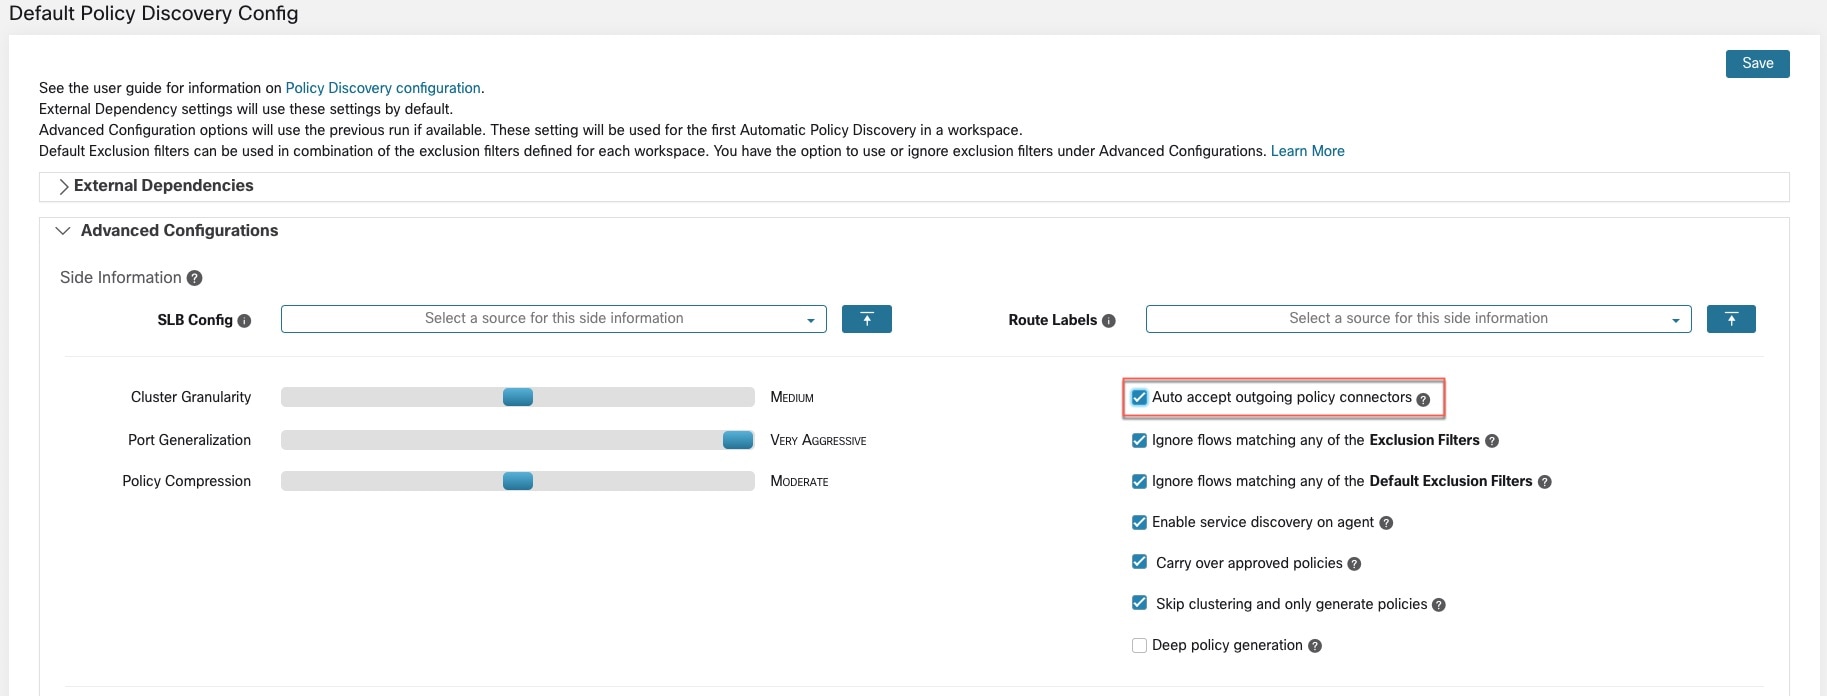 Select Auto accept outgoing policy connectors option